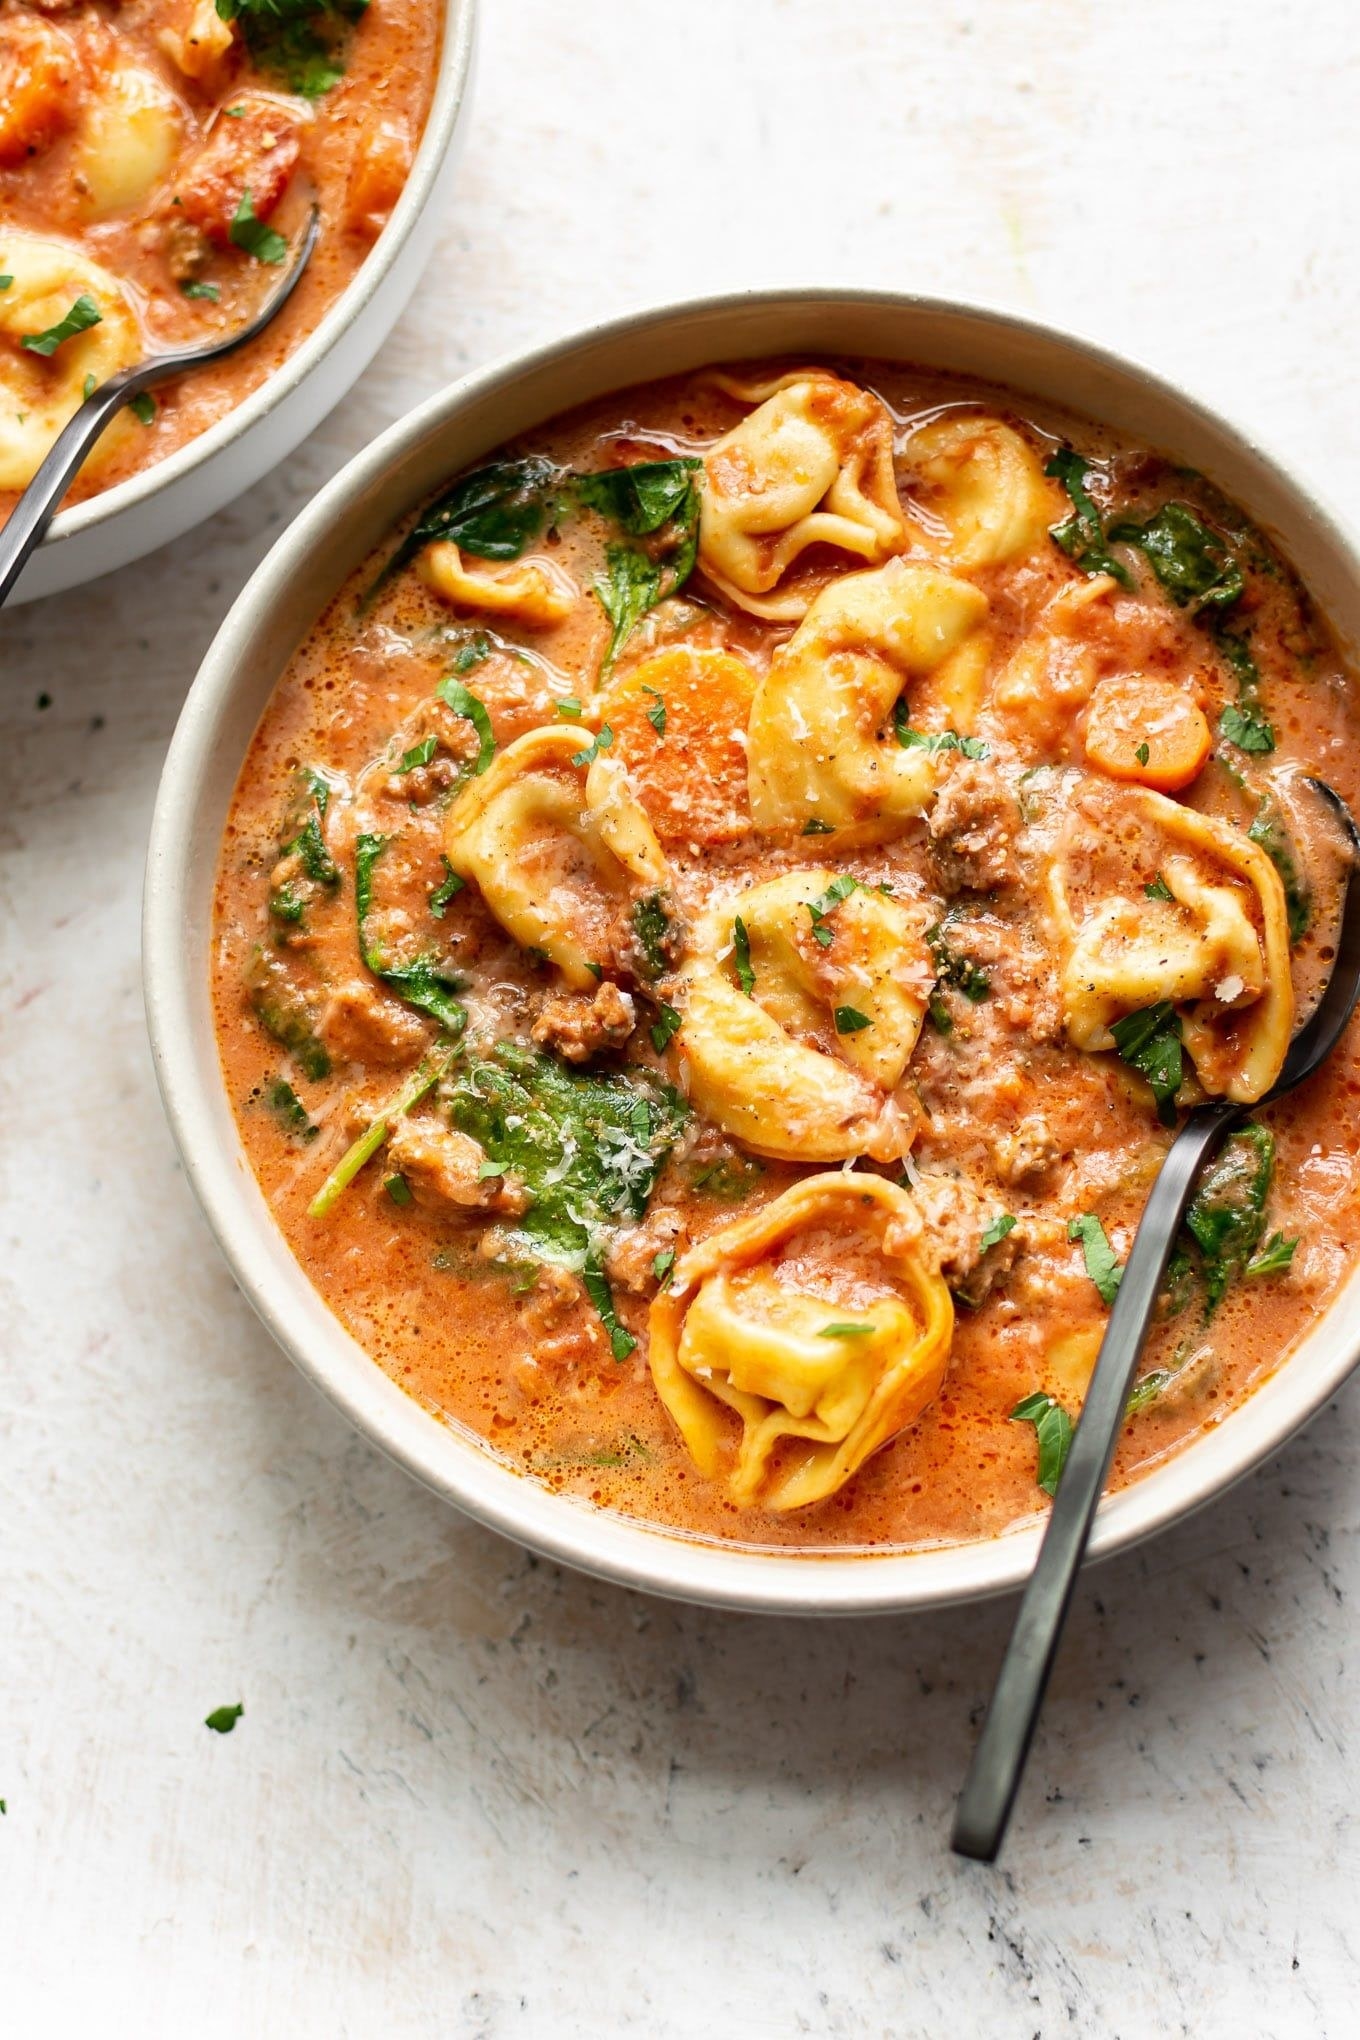 Crockpot tortellini soup with sausage in a bowl